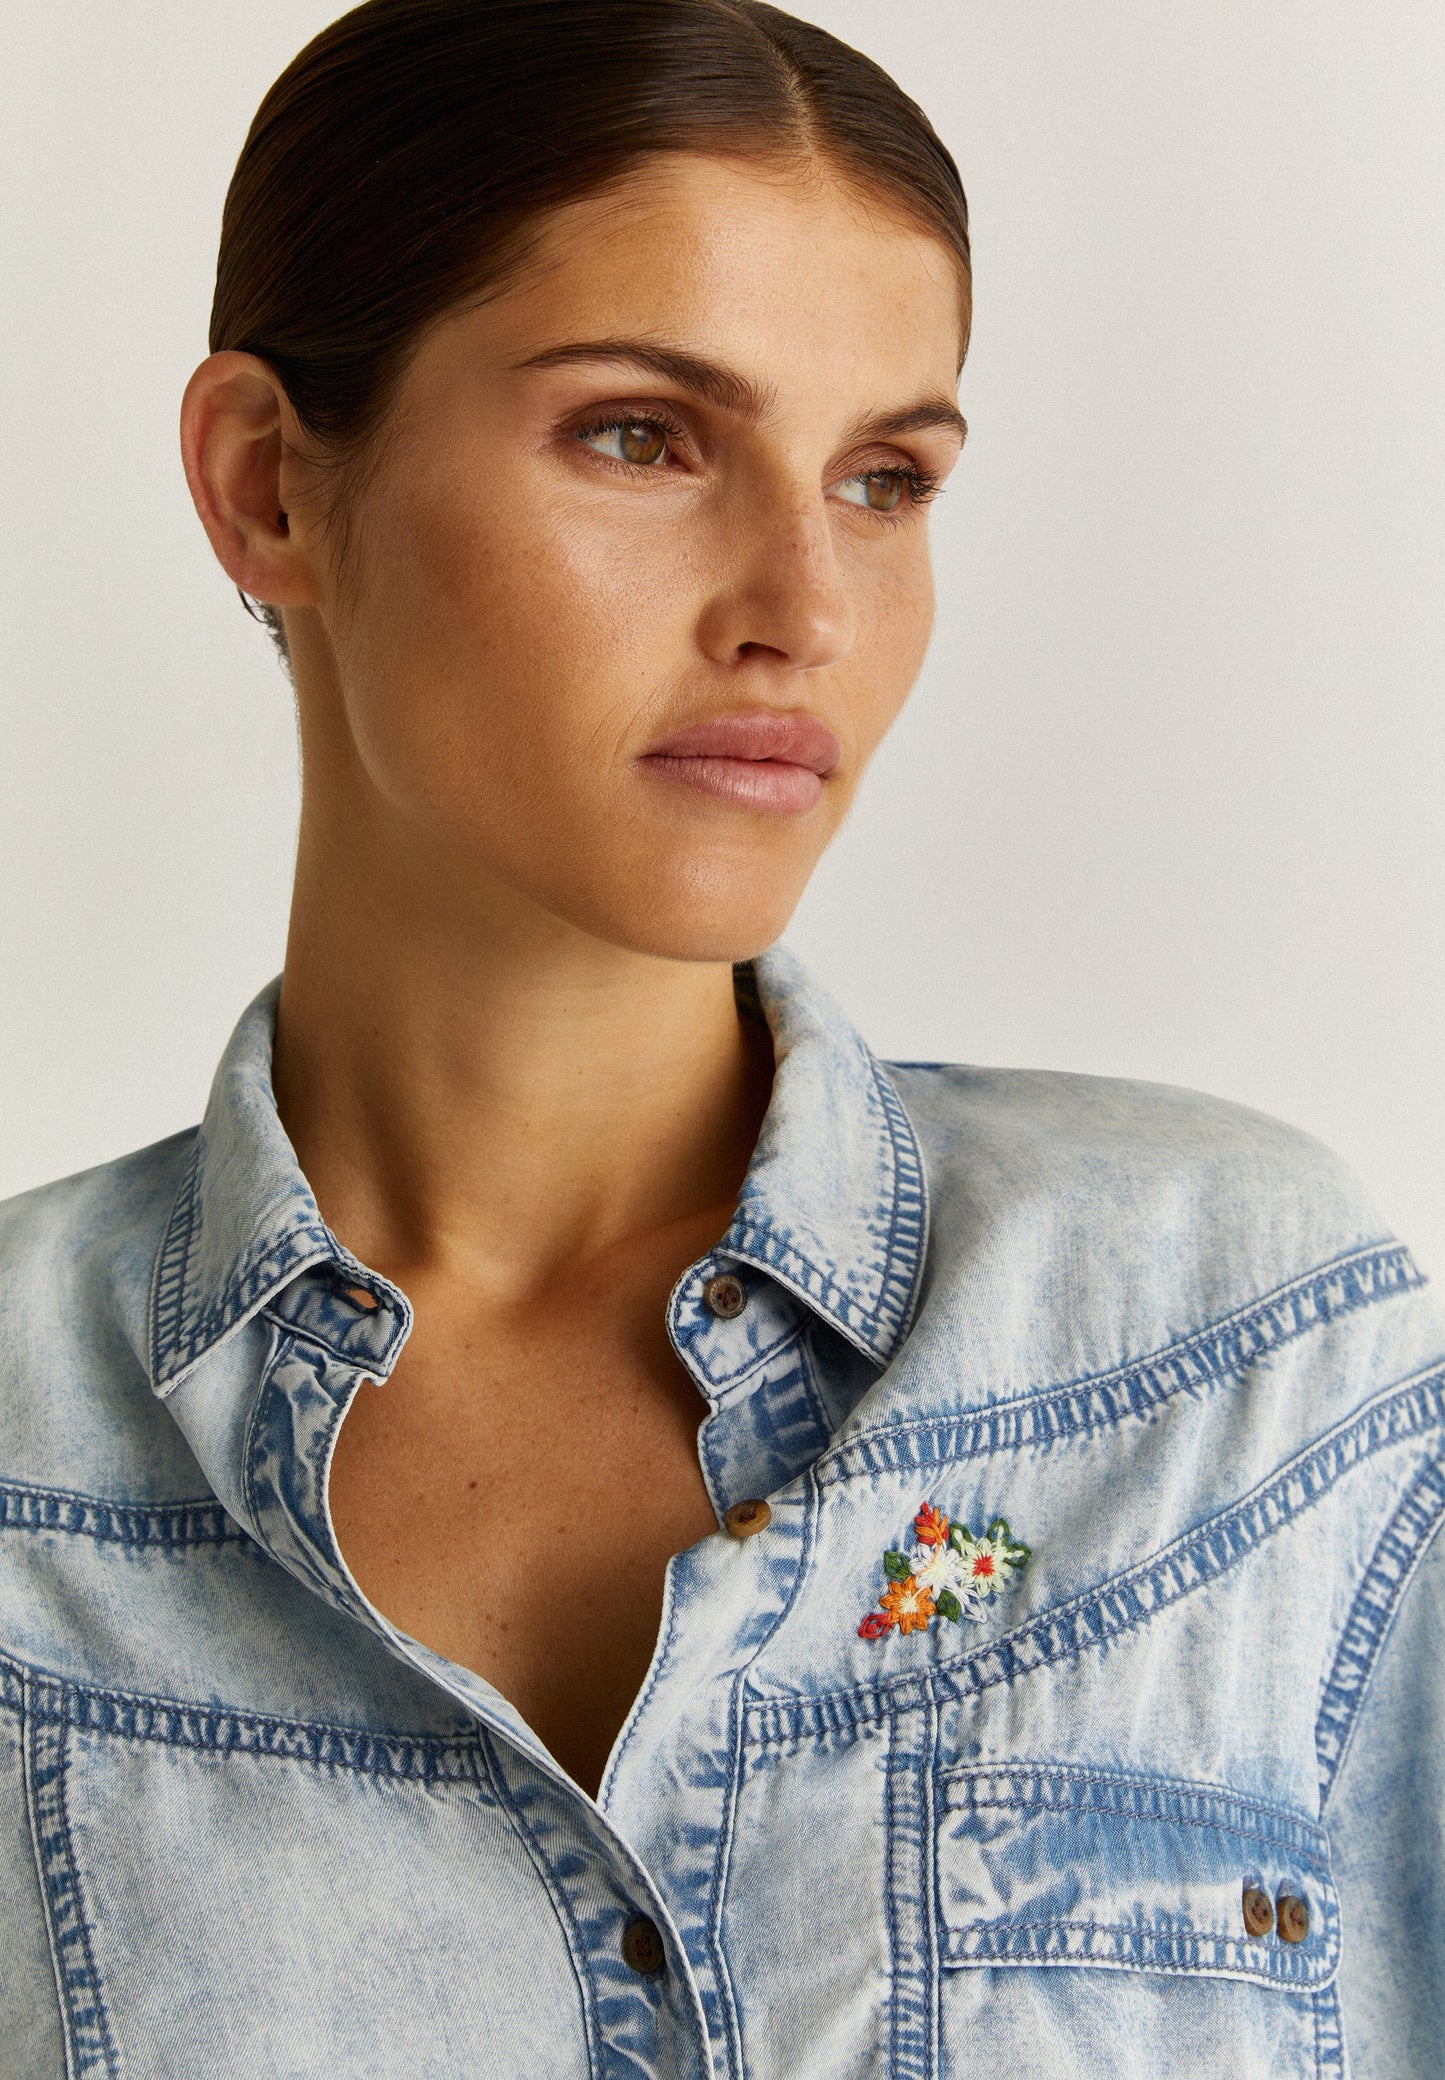 DENIM SHIRT WITH EMBROIDERED DETAILS